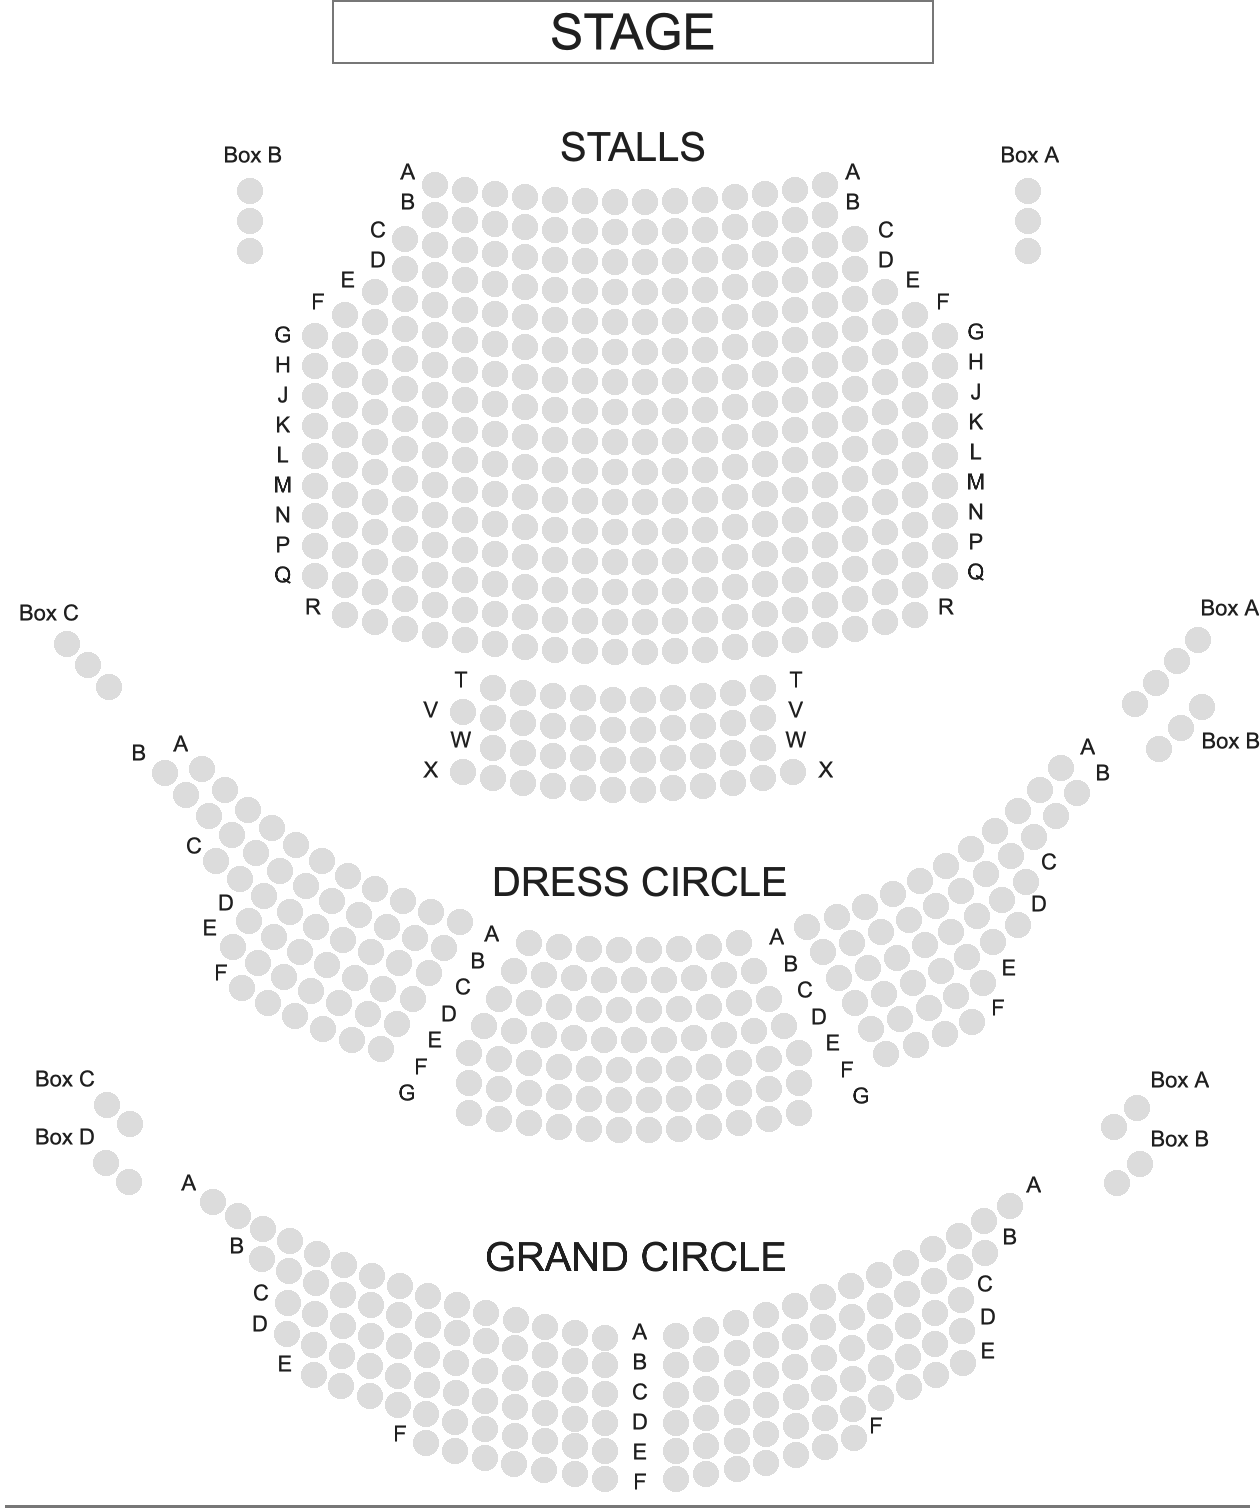 Cambridge Theatre London seat map and prices for Matilda the Musical